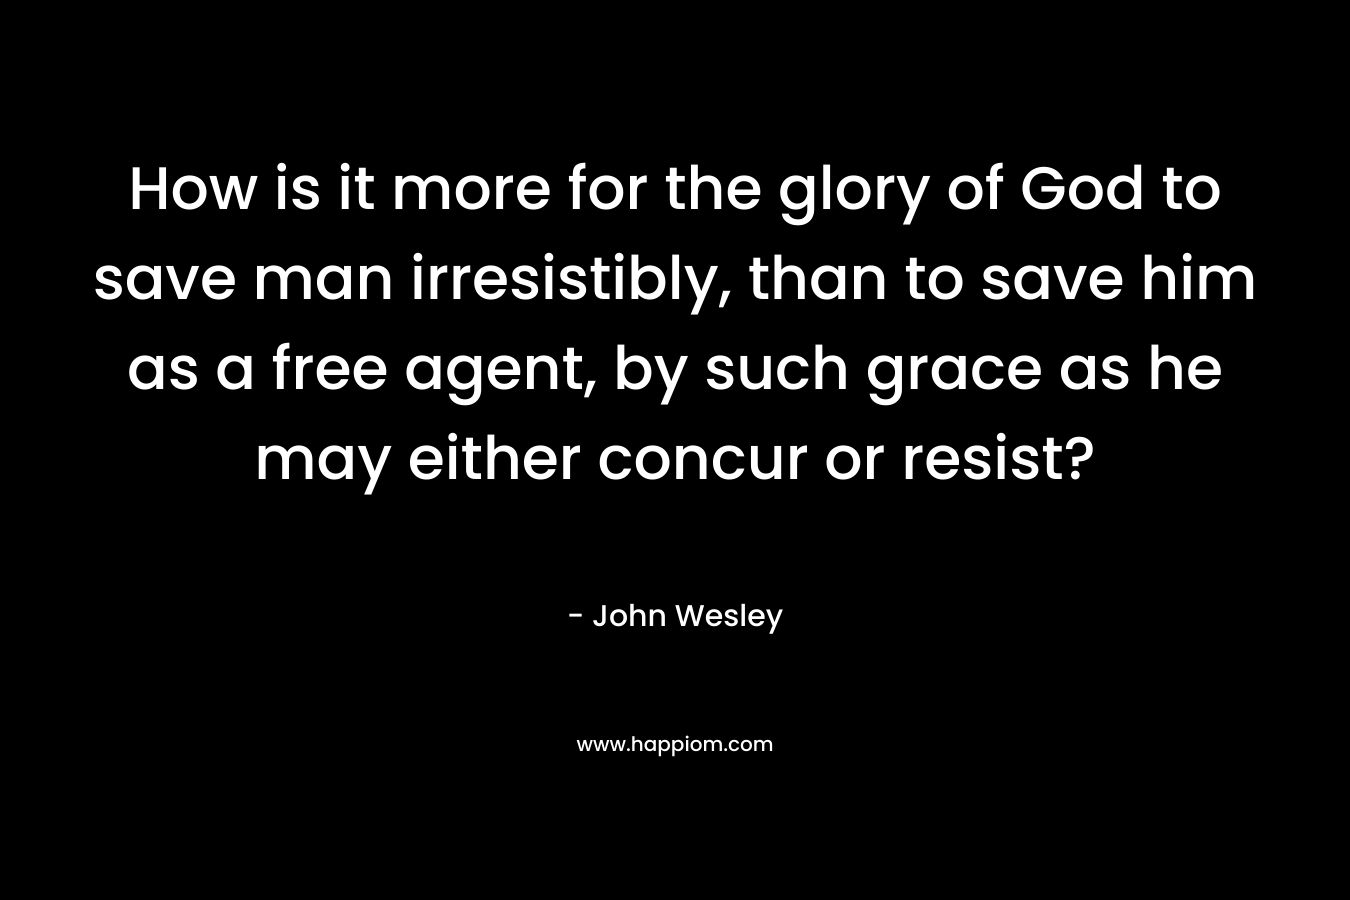 How is it more for the glory of God to save man irresistibly, than to save him as a free agent, by such grace as he may either concur or resist?